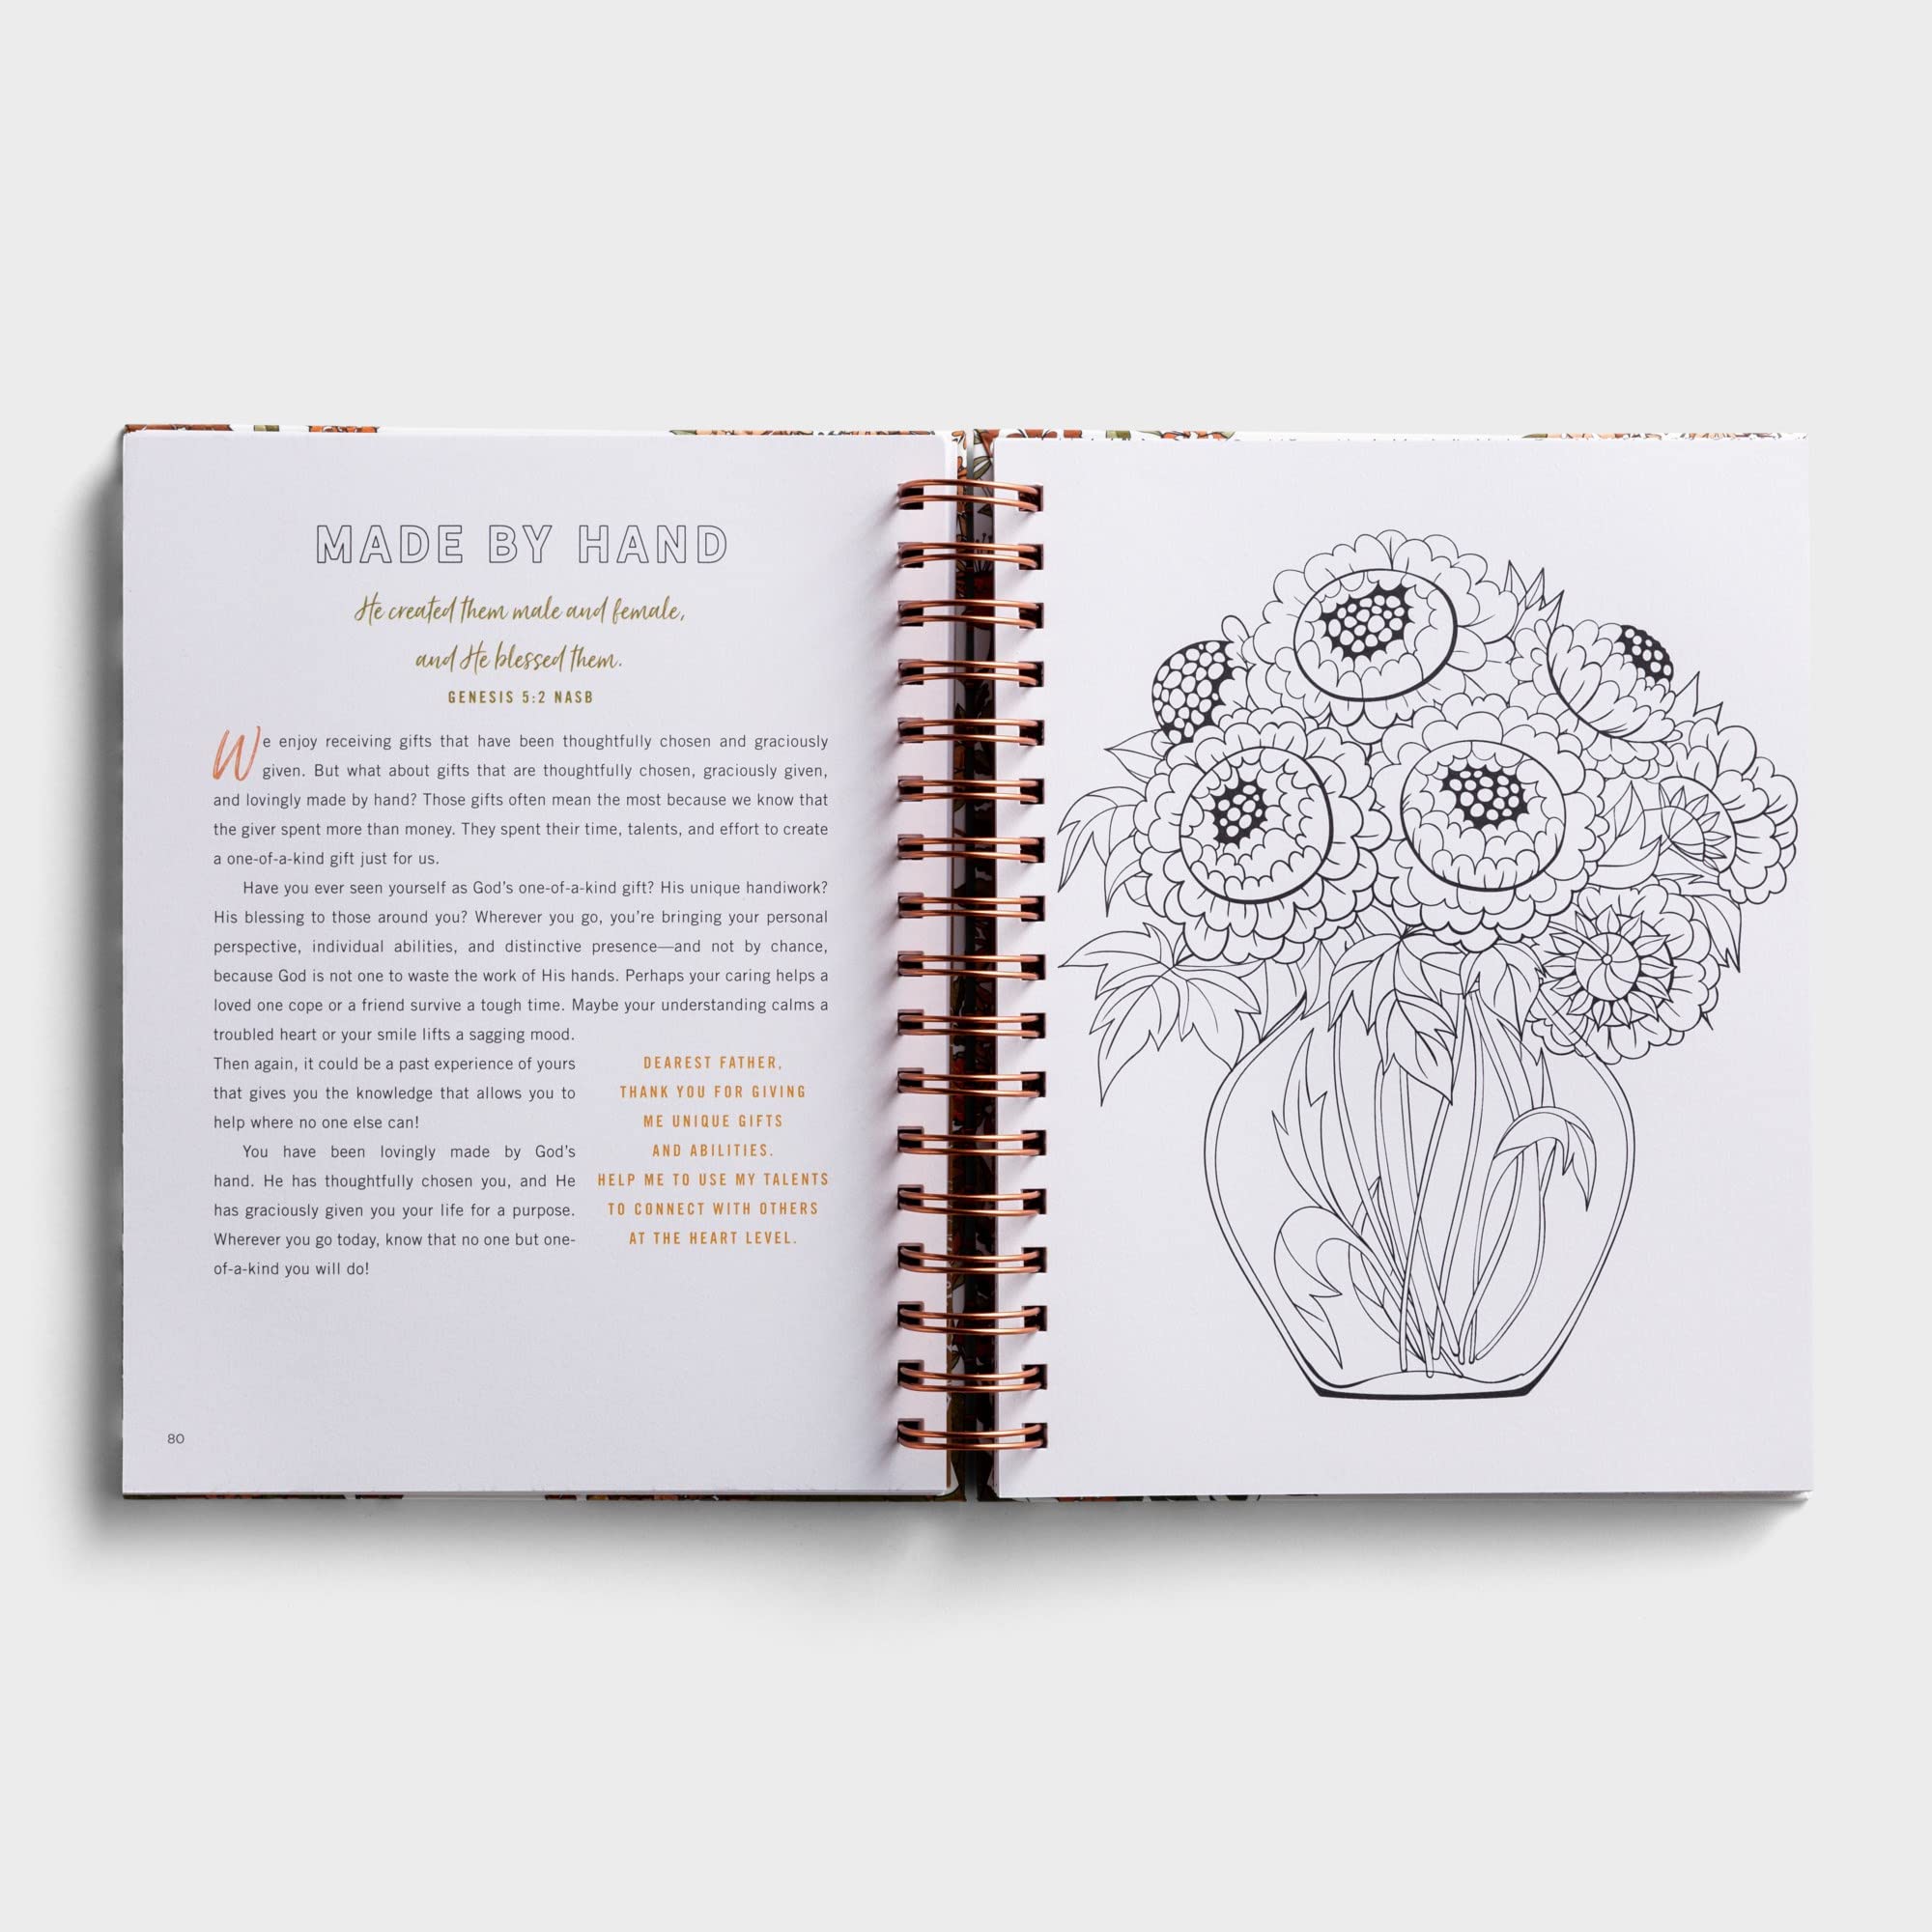 Set Your Mind on Things Above: Devotional Coloring Book